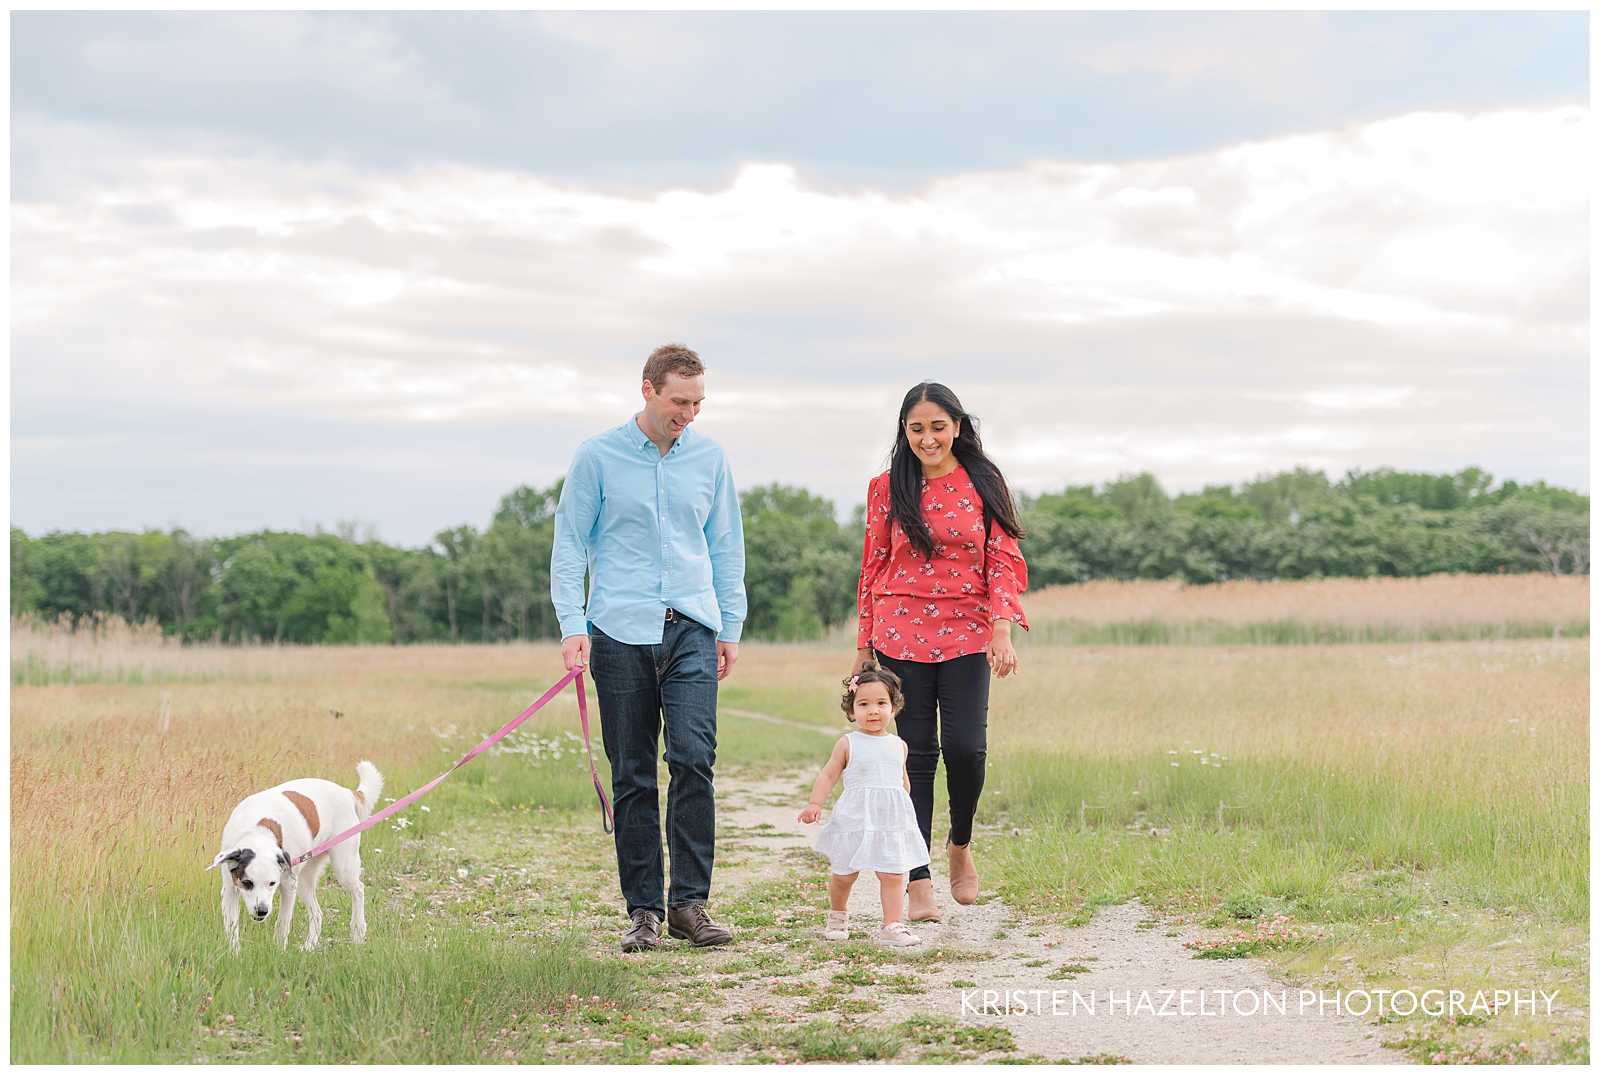 Family photos in Forest Park, IL by photographer Kristen Hazelton